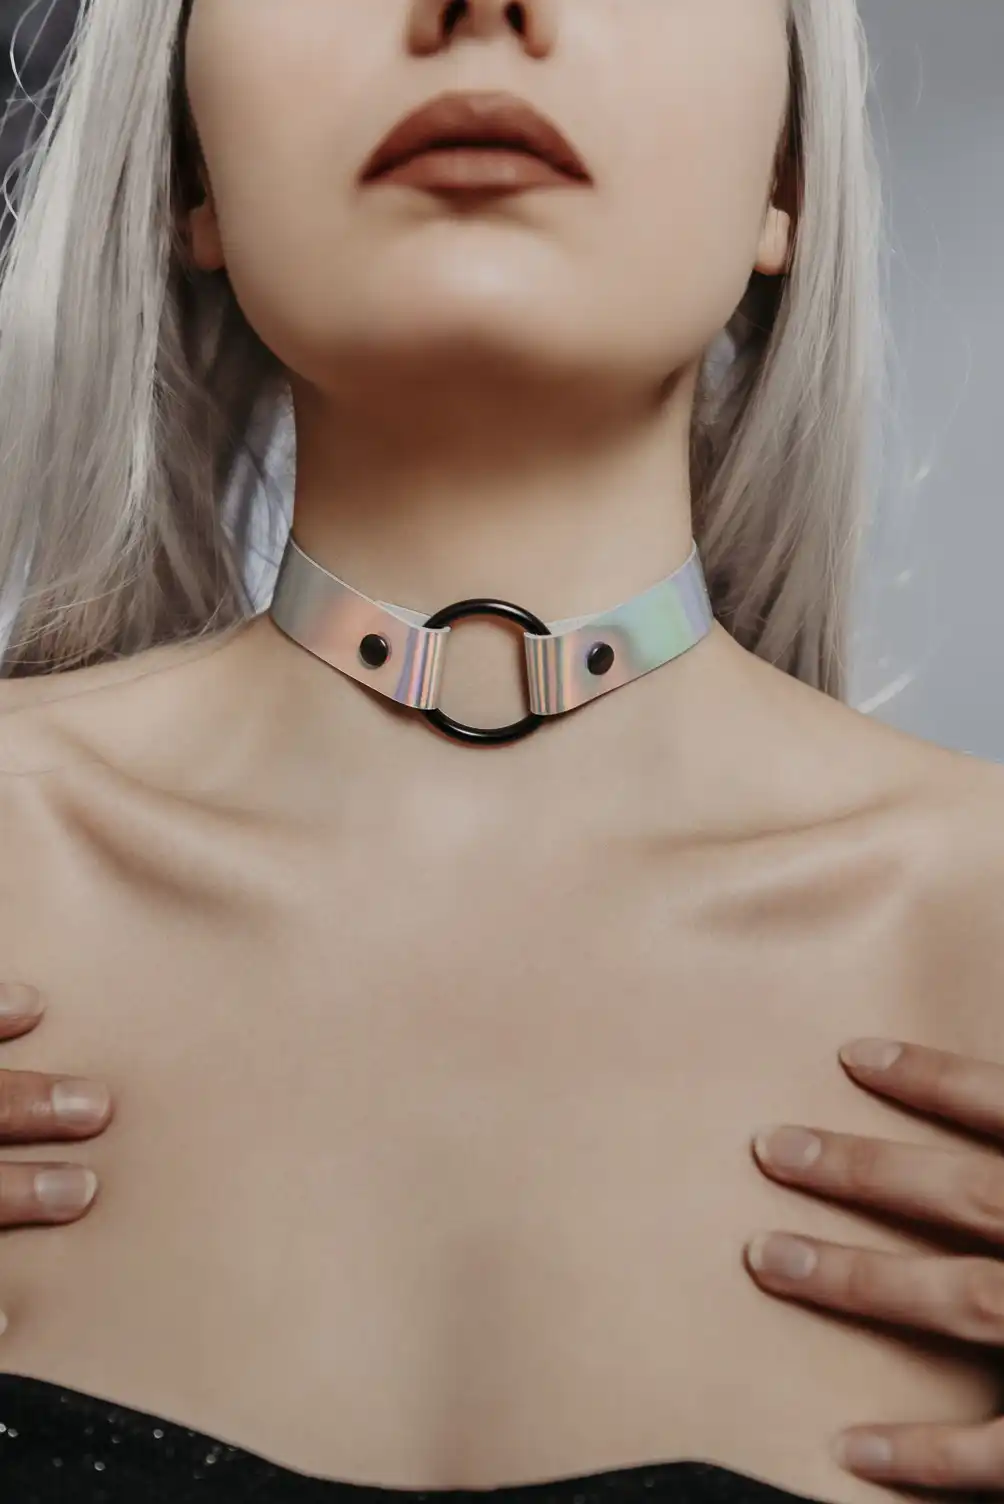 Leather choker necklace with black ring in hologram color.